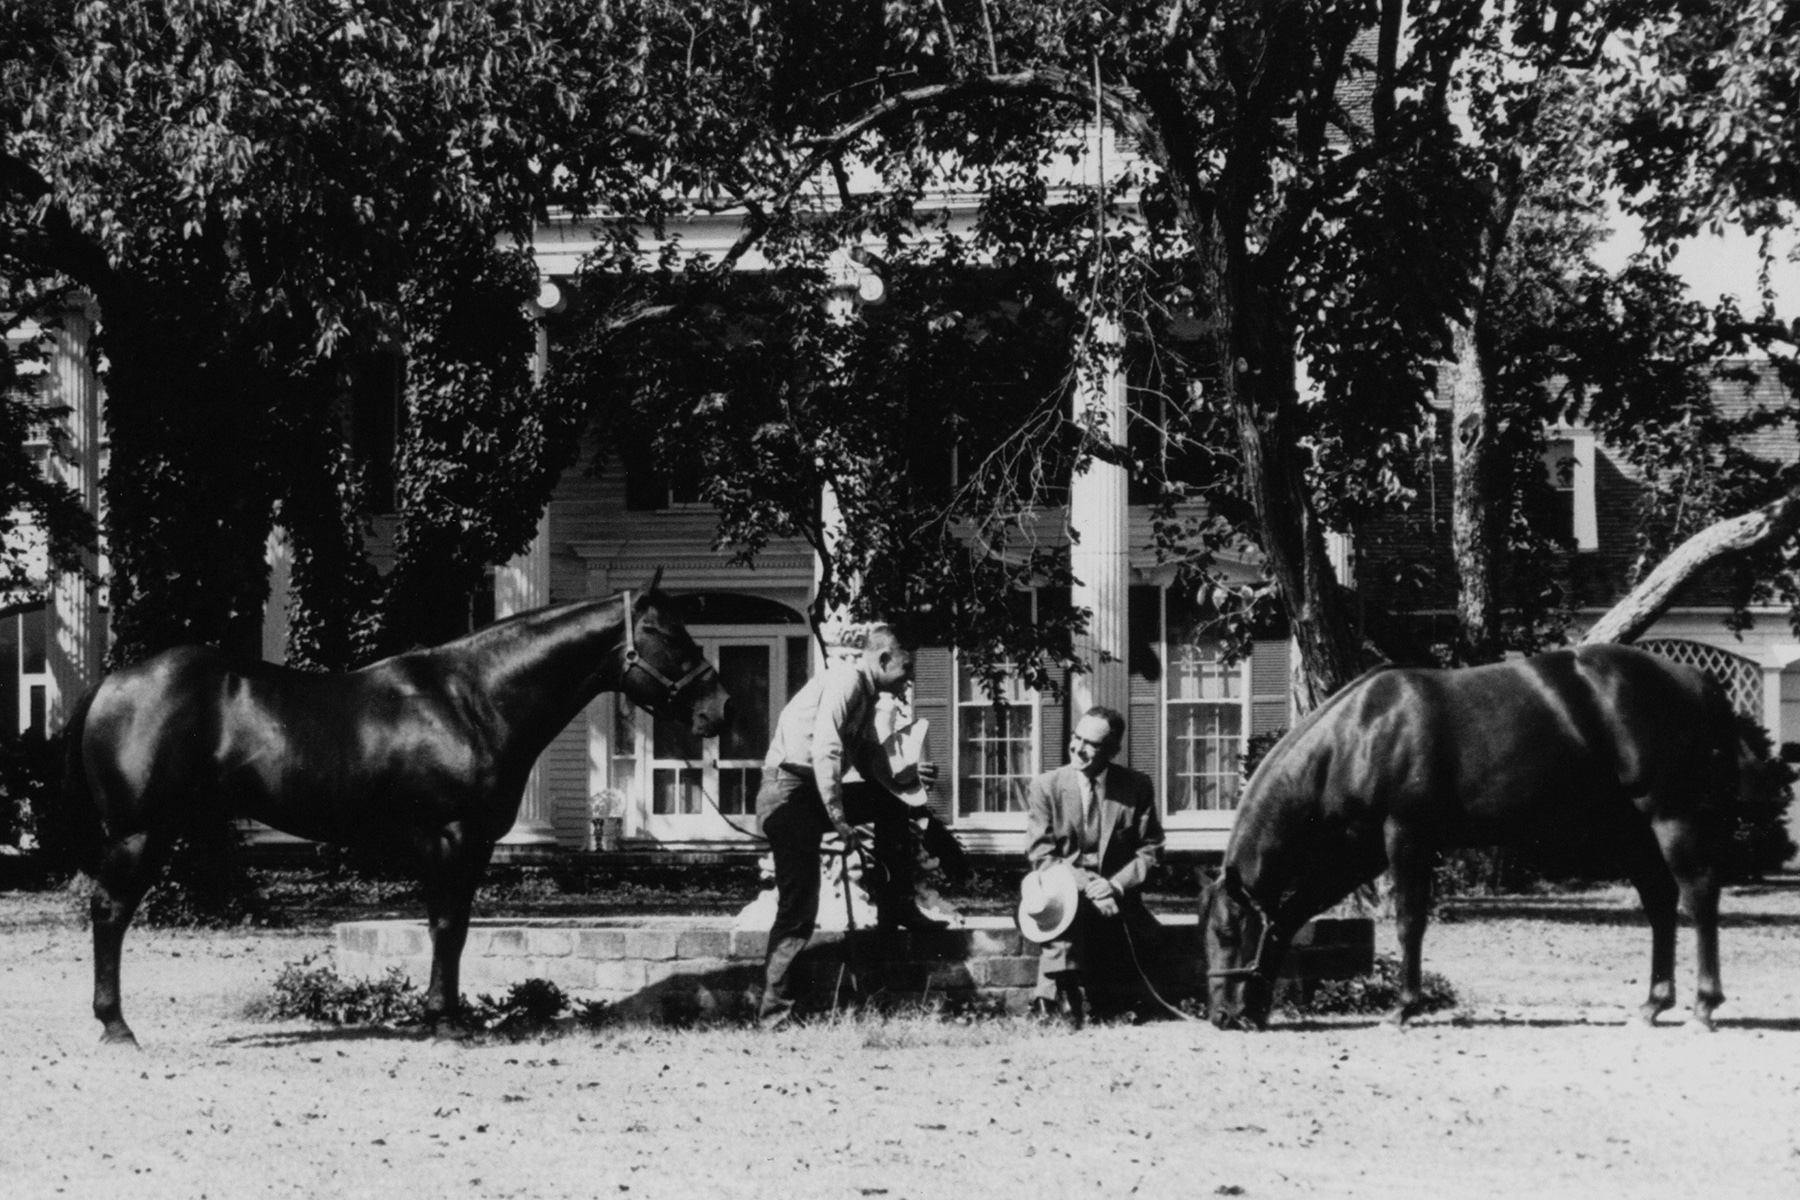 Will Caruth Jr and his horse trainer and horses in 1959